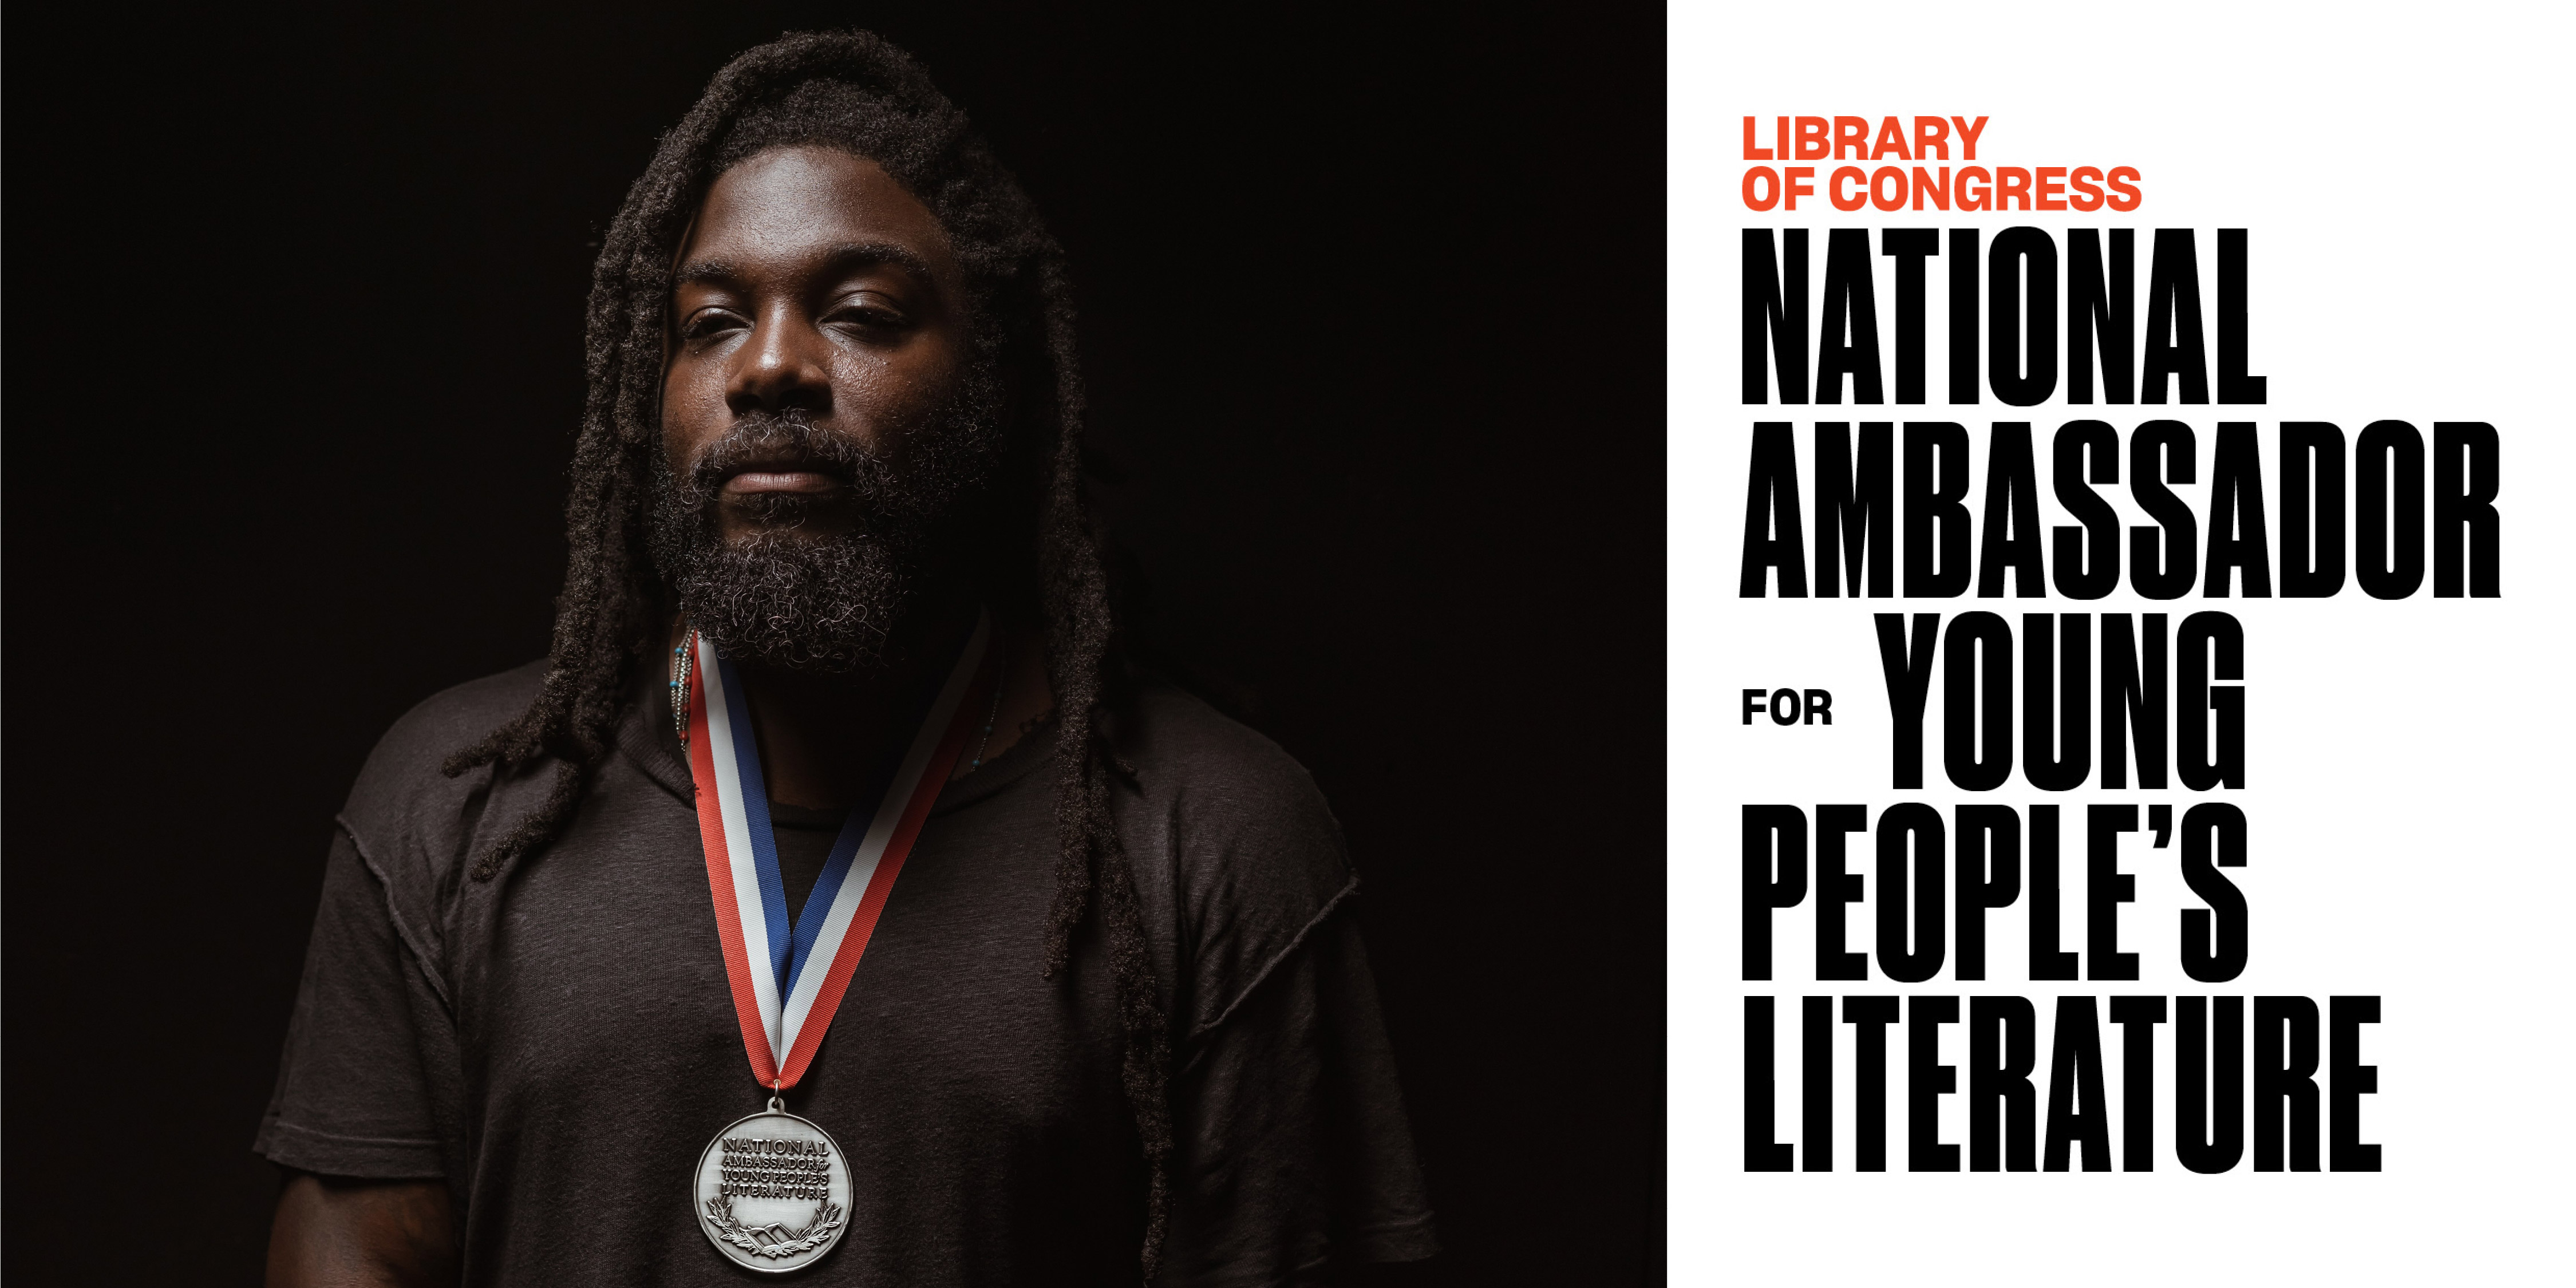 Jason Reynolds. Library of Congress, National Ambassador for Young People's Literature.